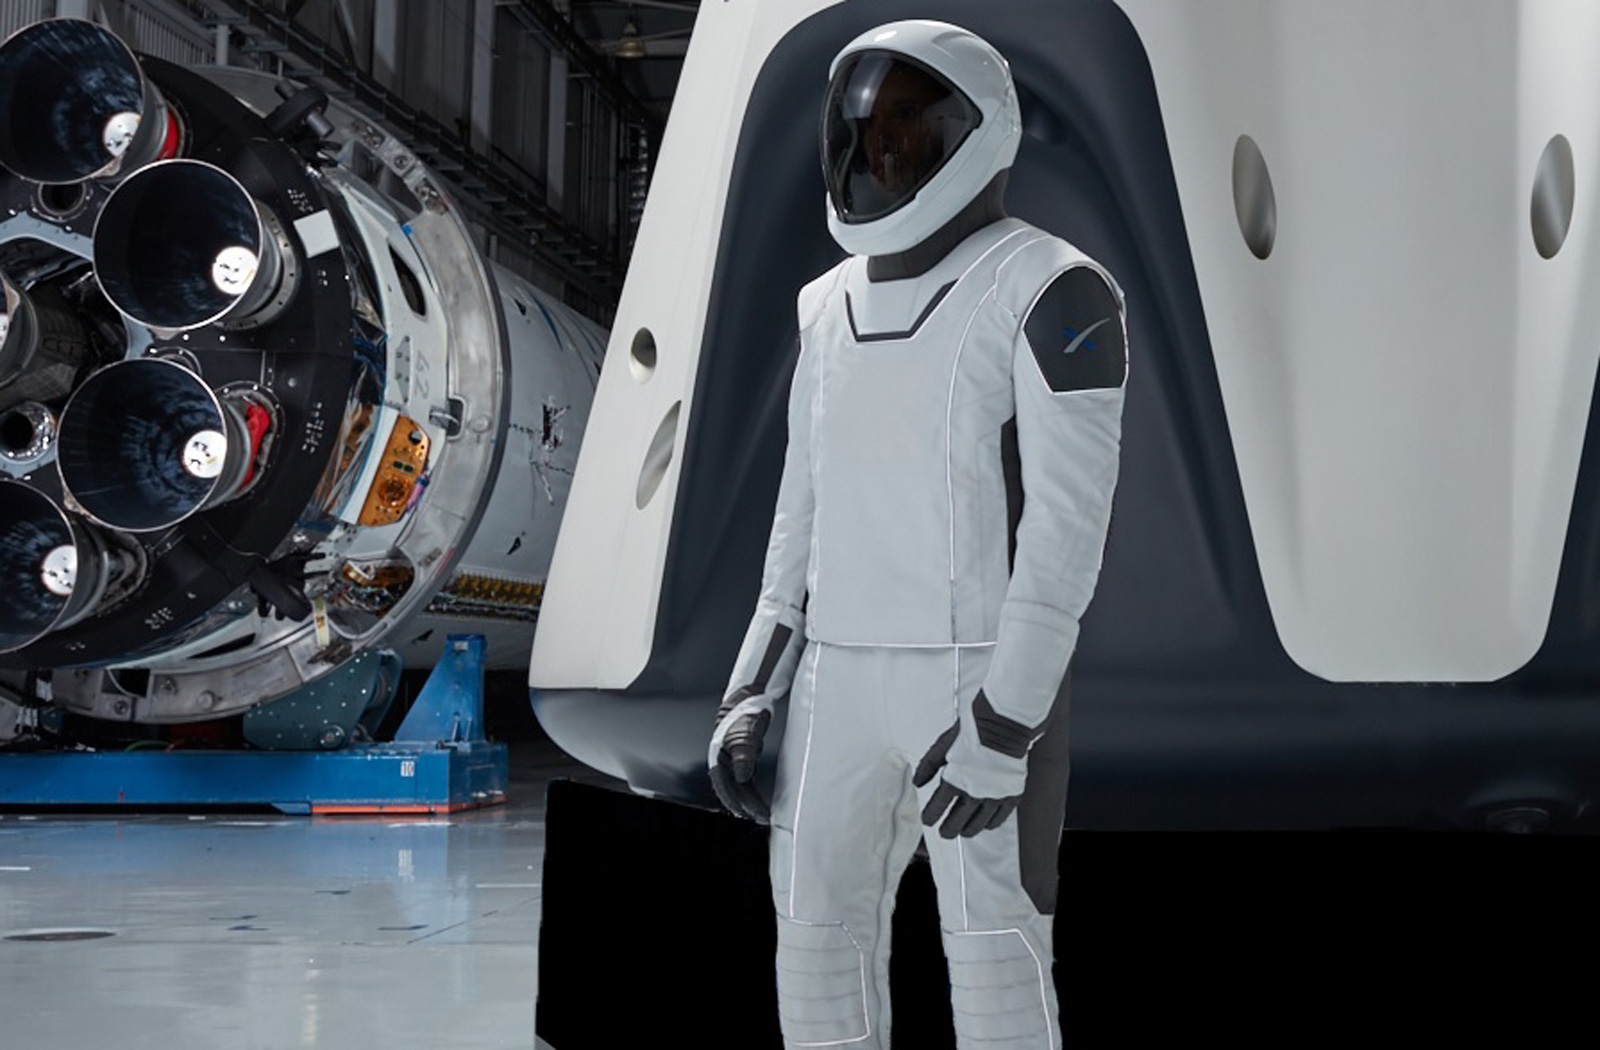 SpaceX Crew Dragon Modules with Space Suit